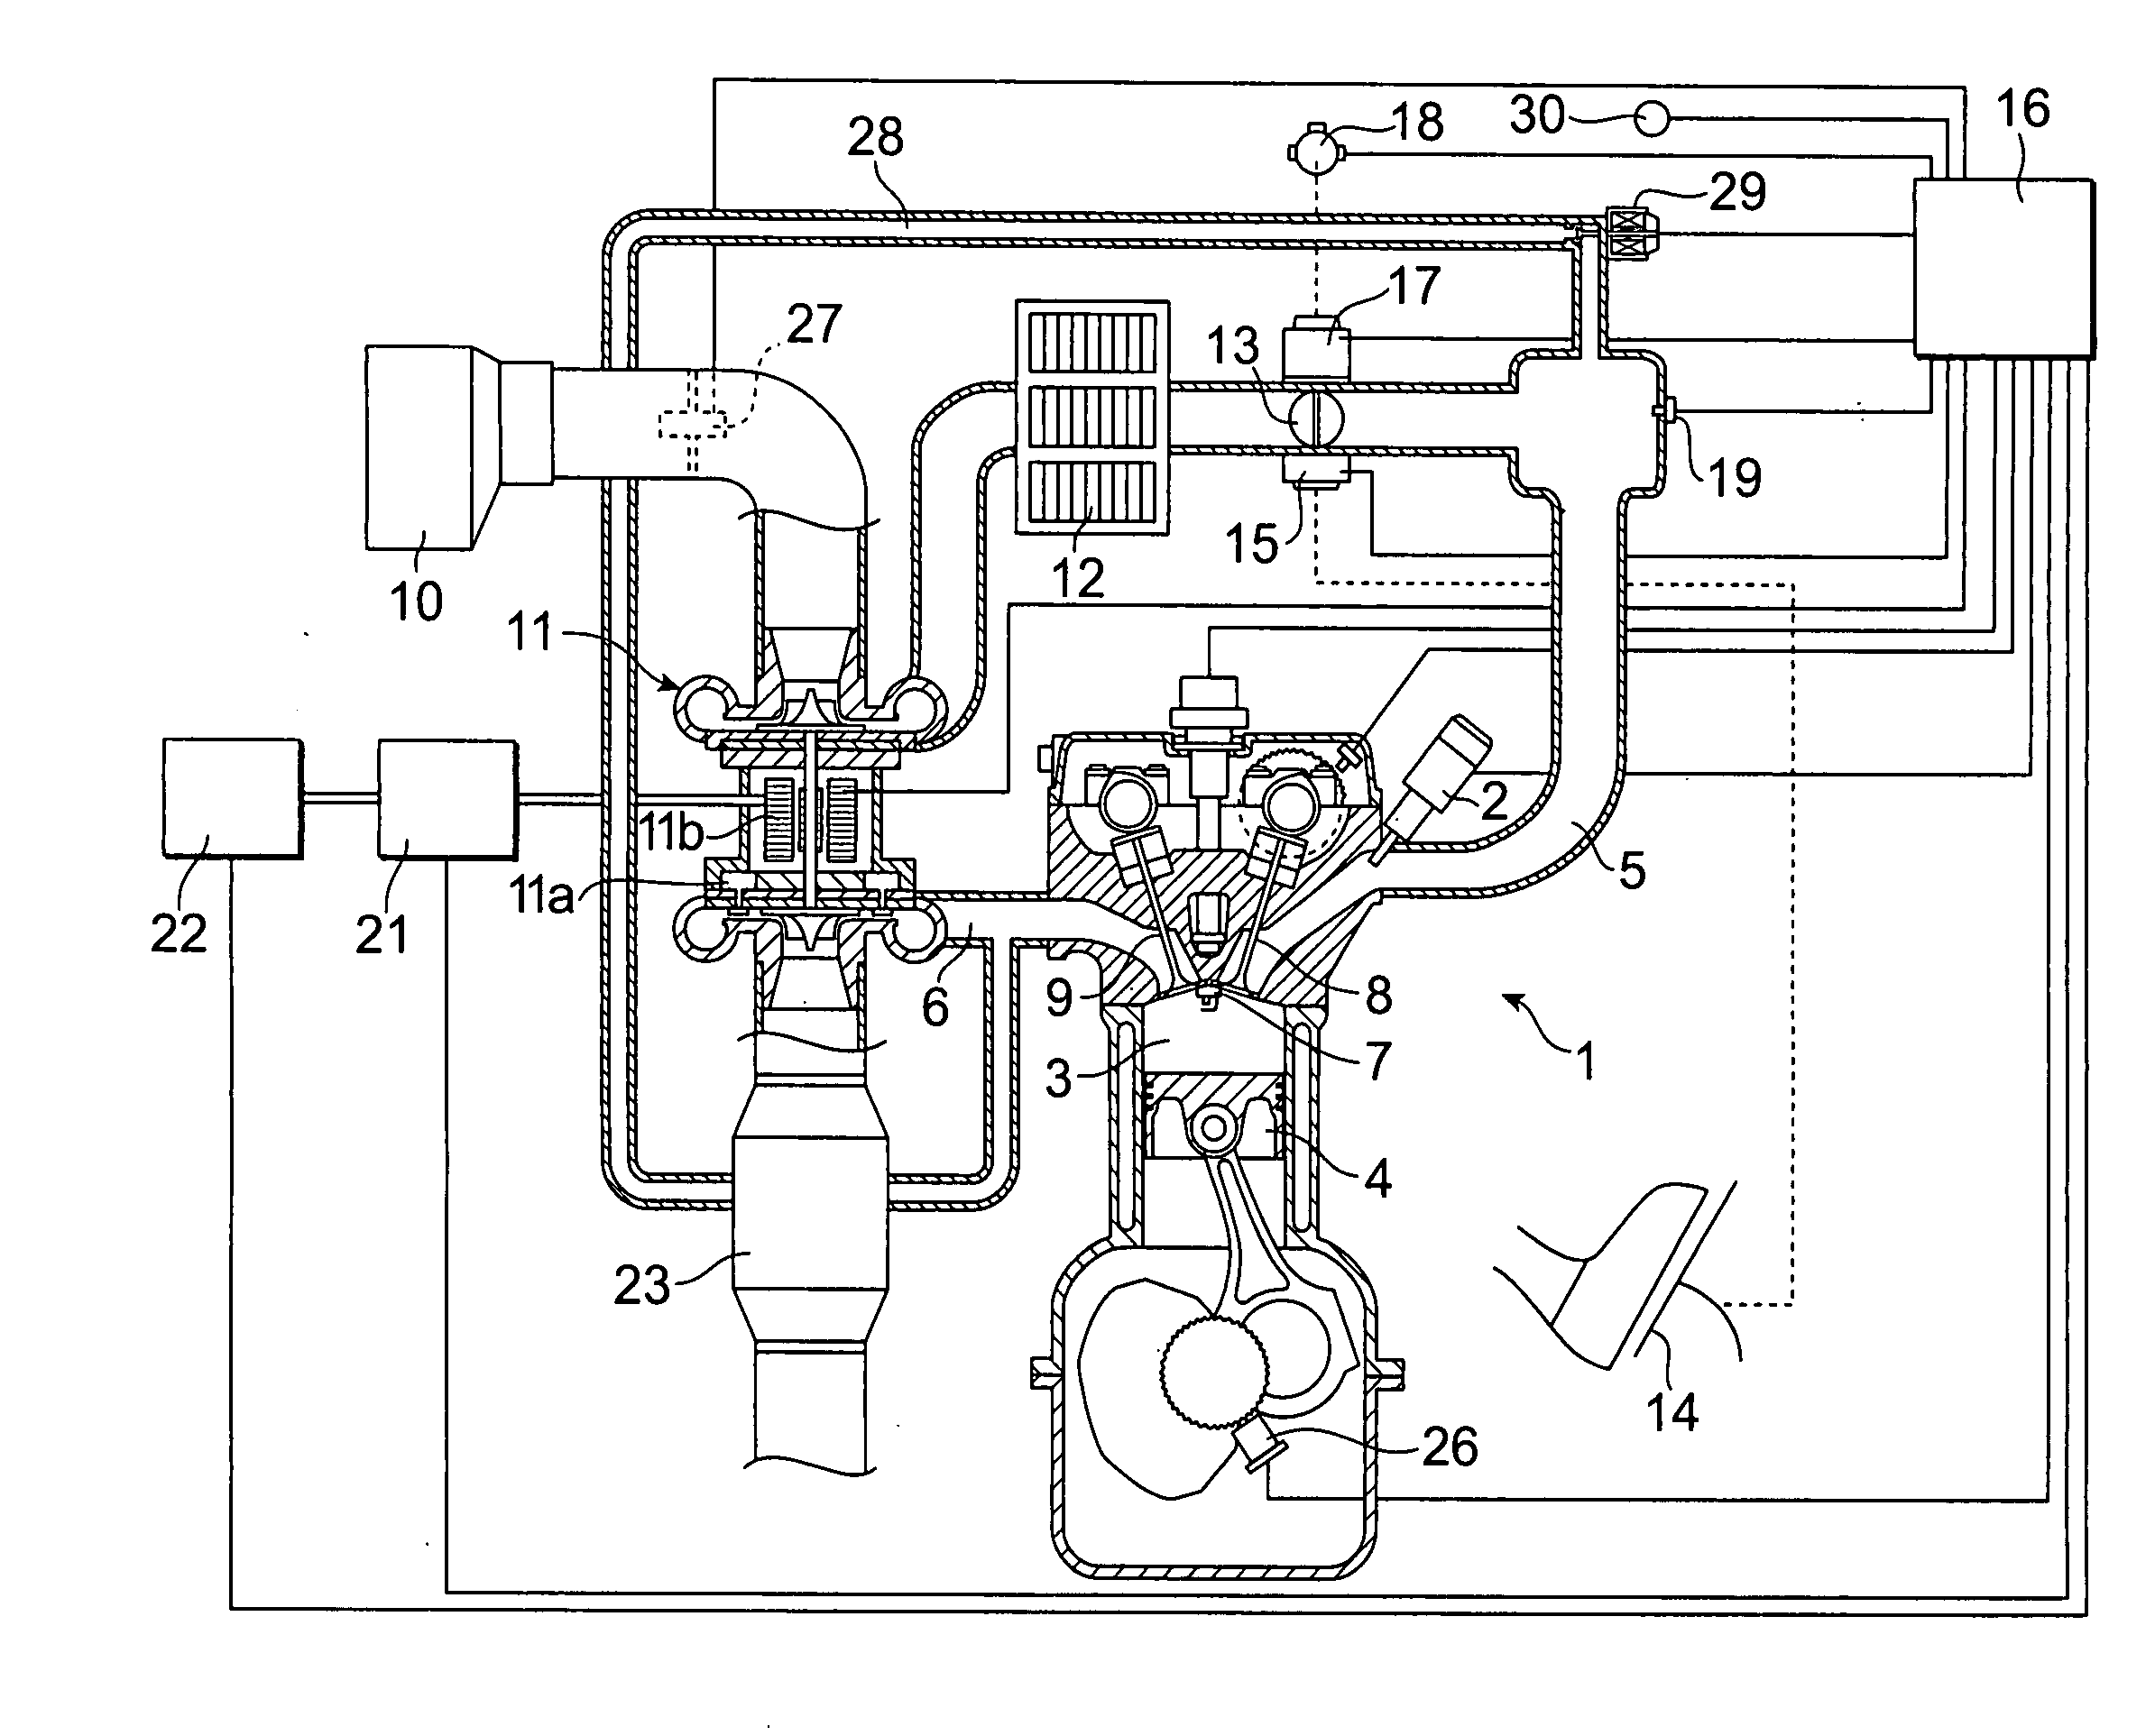 Control Device Supercharger with Electric Motor